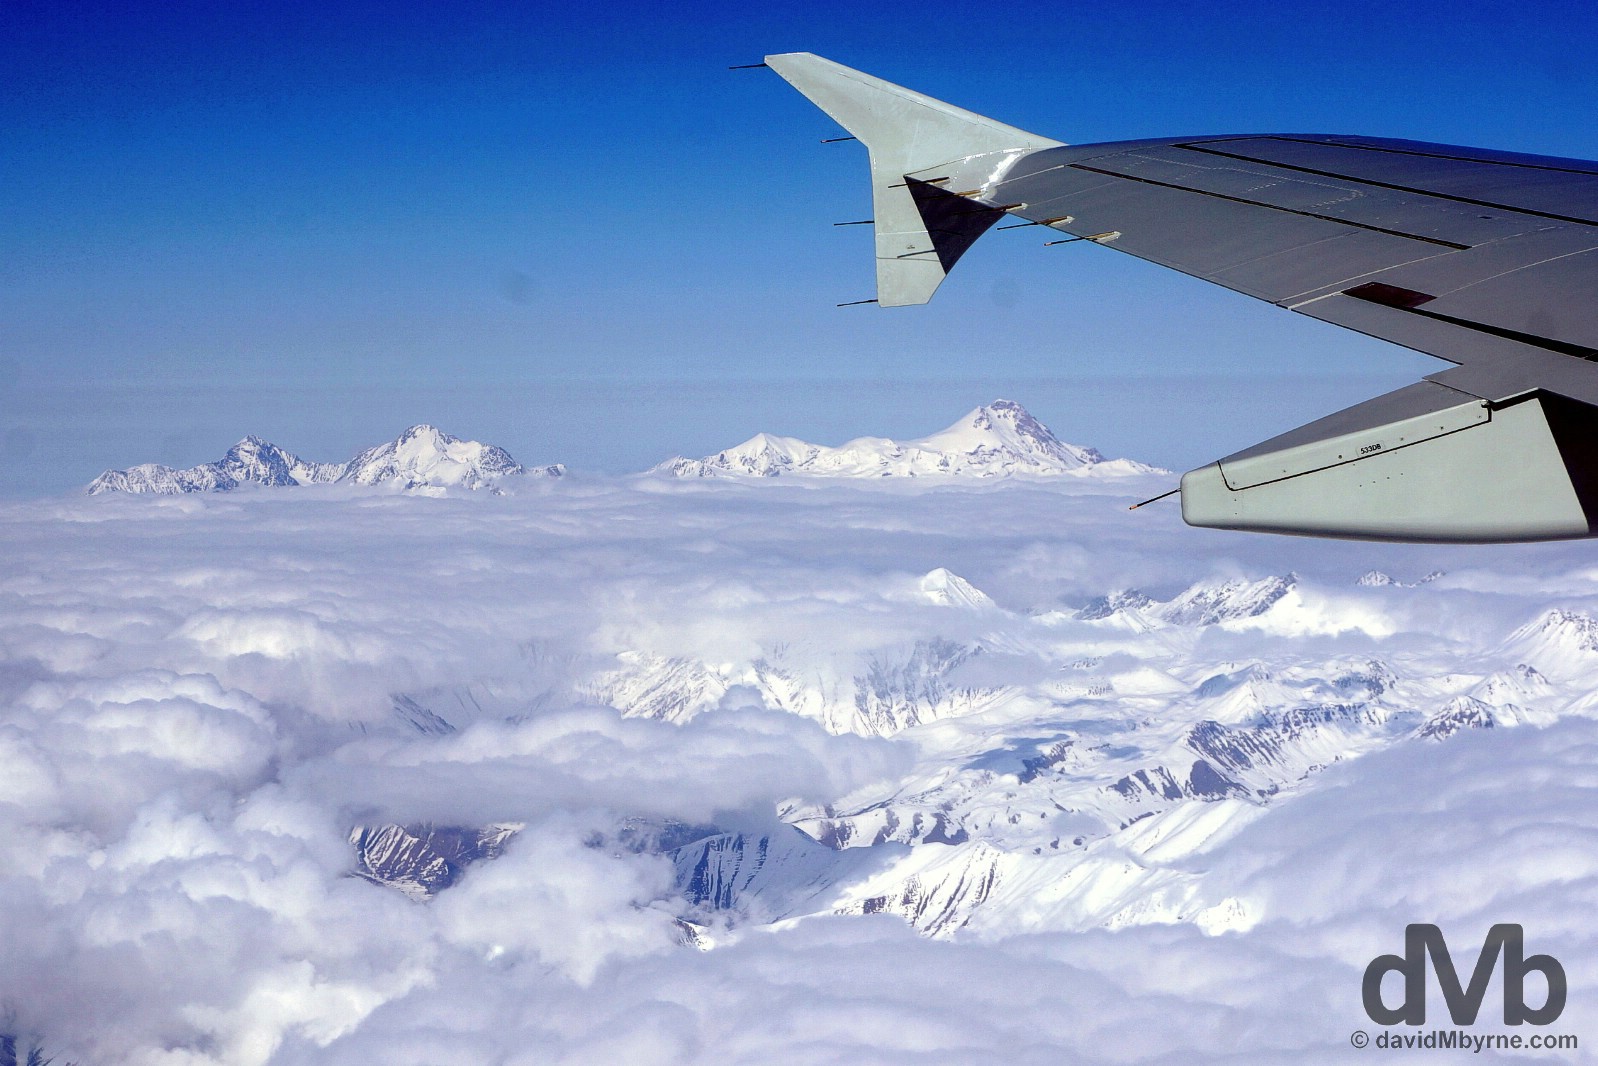 Caucasus Mountain scenery as seen from Siberia S7 Airlines flight 955 en route from Moscow, Russia, to Tbilisi, Georgia. March 18, 2015.   